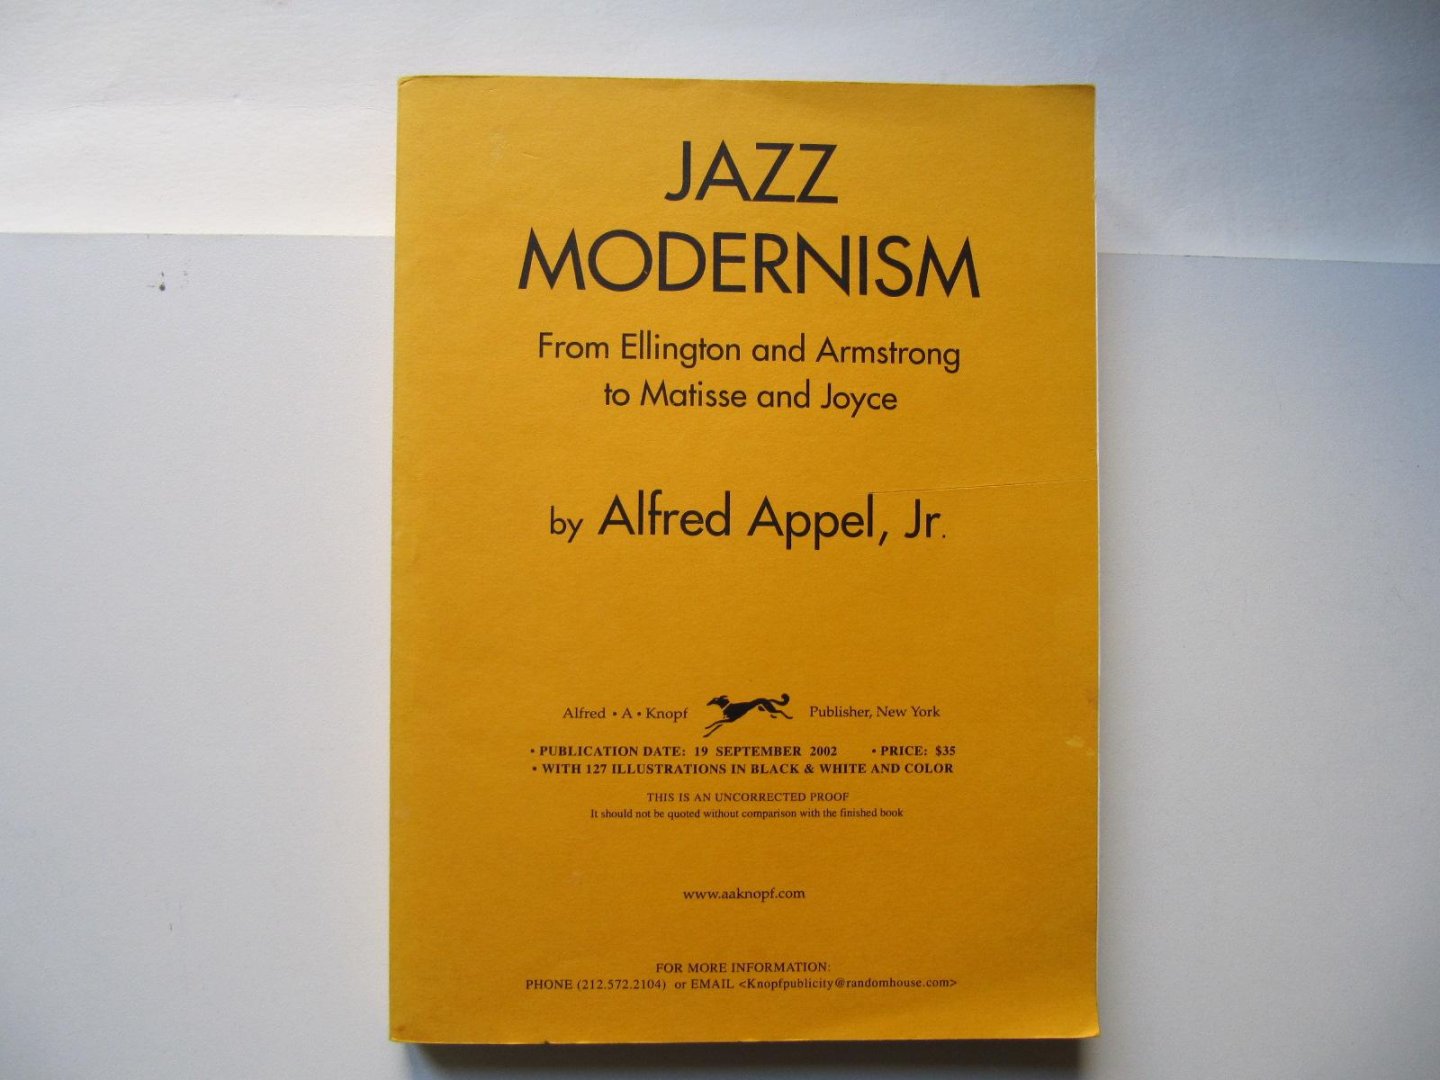 A. Appel Jr. - Jazz Modernism- from Ellington and Armstrong to Matisse and Joyce